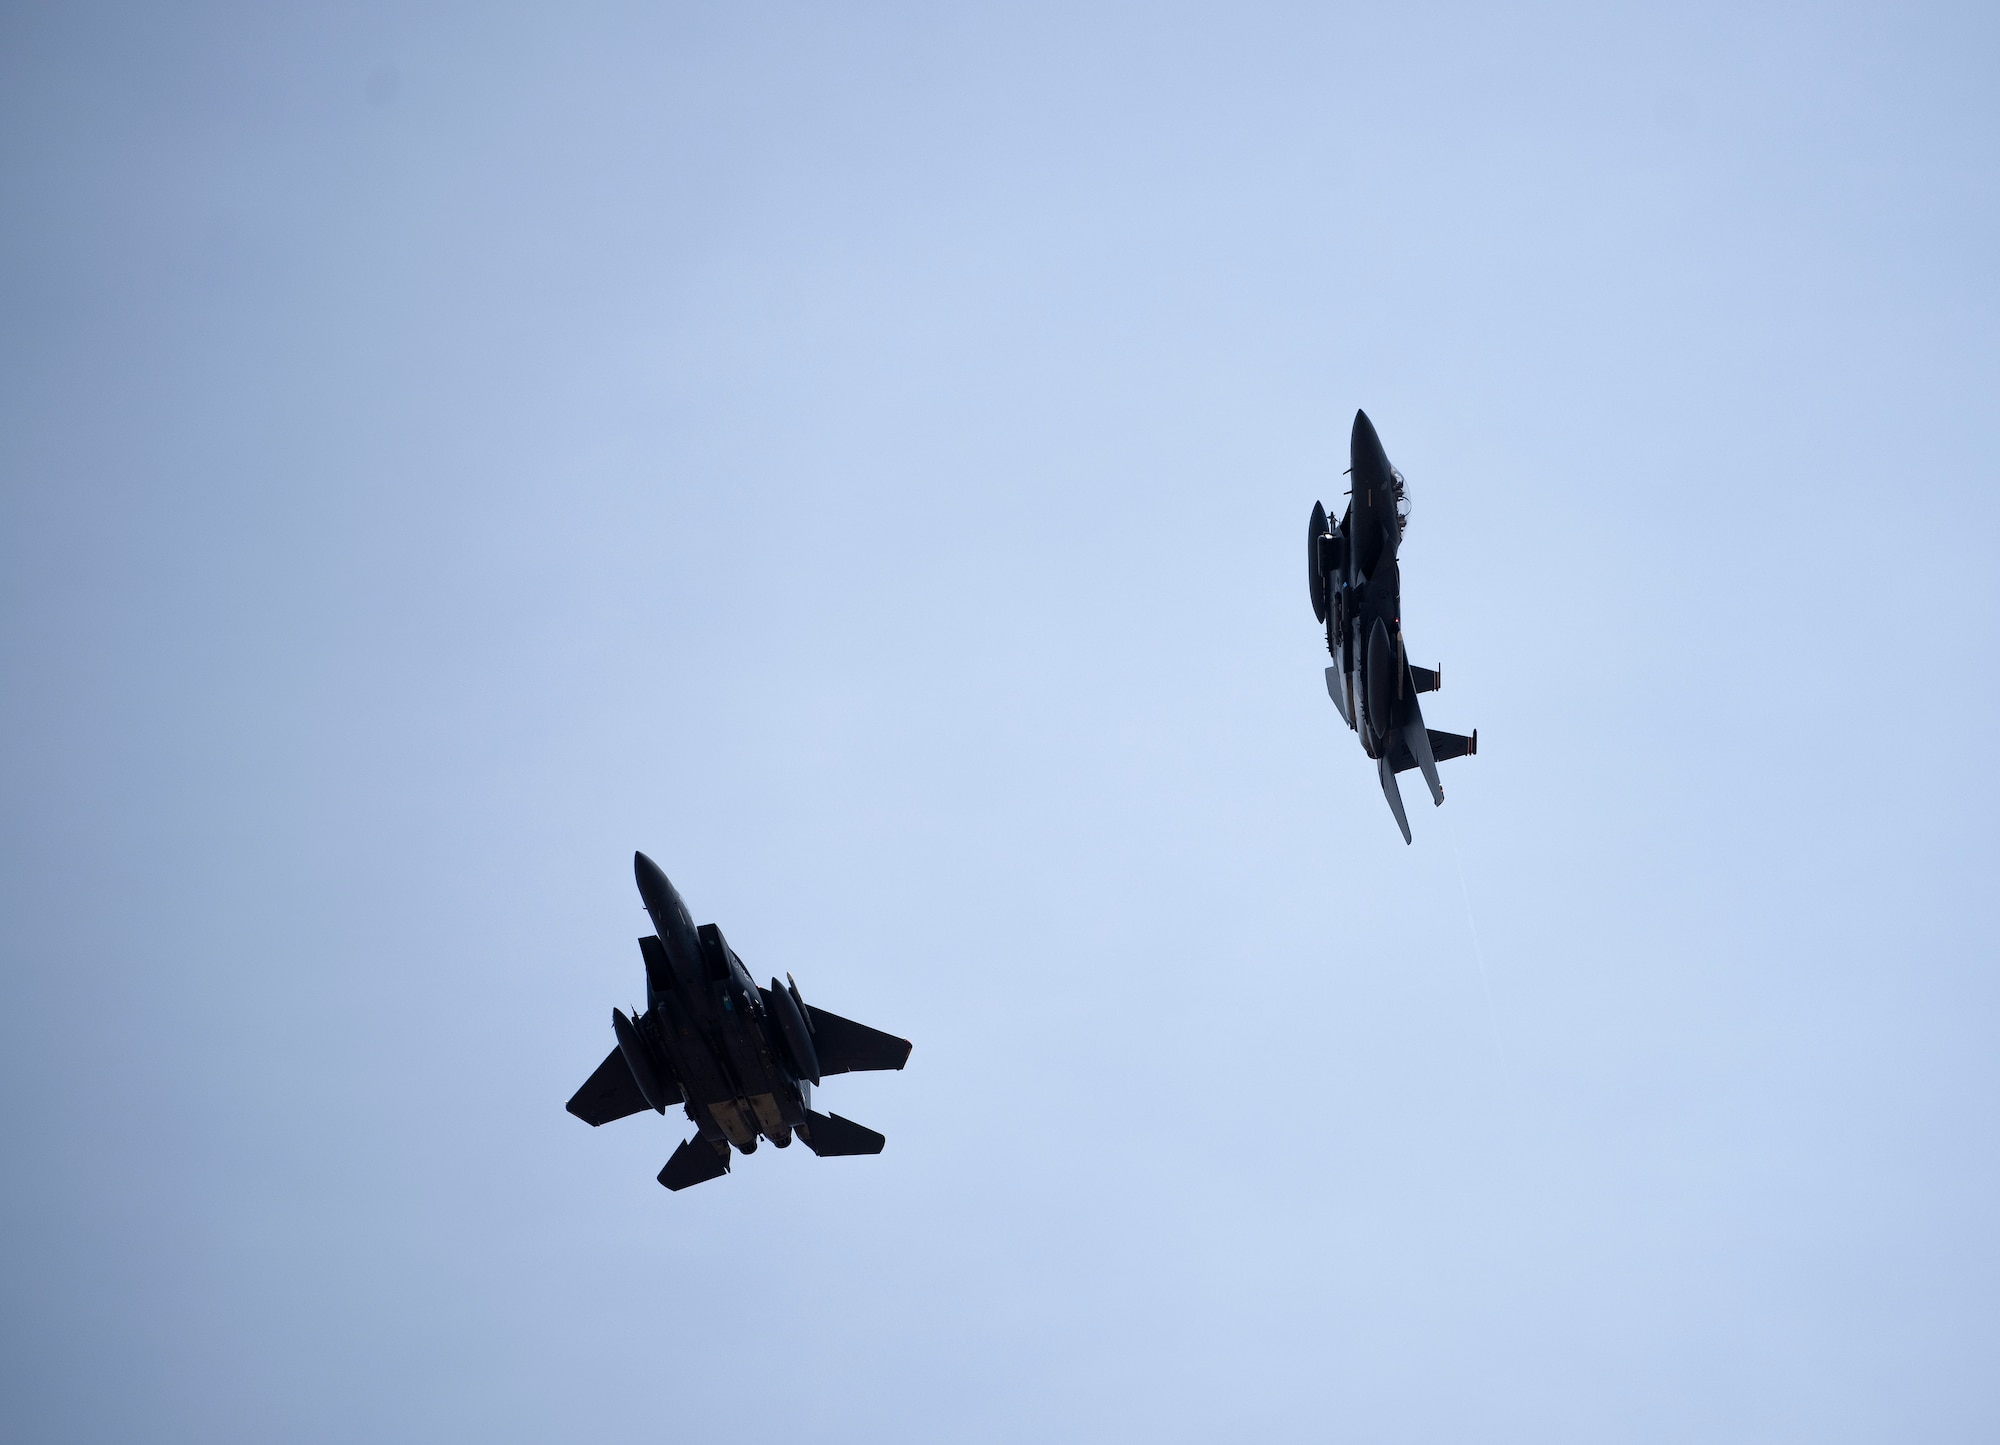 Two F-15E Strike Eagles assigned to the 494th Fighter Squadron fly over Royal Air Force Lakenheath, England, June 2, 2020. Despite the current COVID-19 crisis, the 48th Fighter Wing continues to maintain combat readiness in order to safeguard U.S. national interests and those of the NATO alliance. (U.S. Air Force photo by Airman 1st Class Jessi Monte)